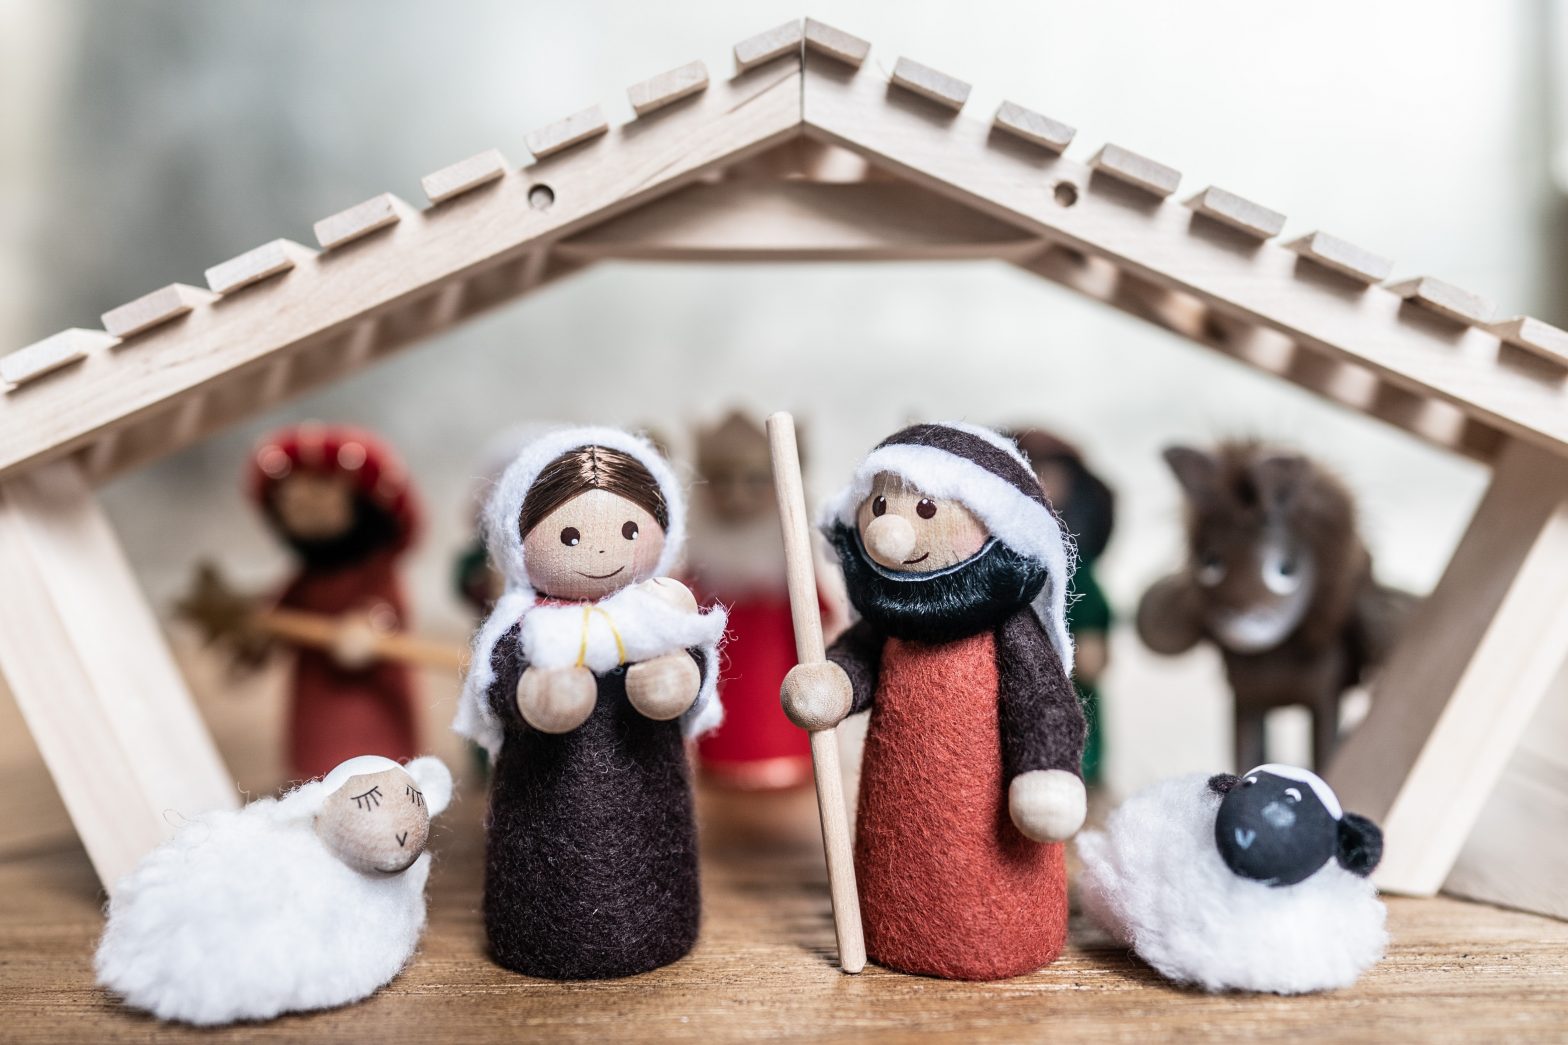 Nativity figures in a model of a stable